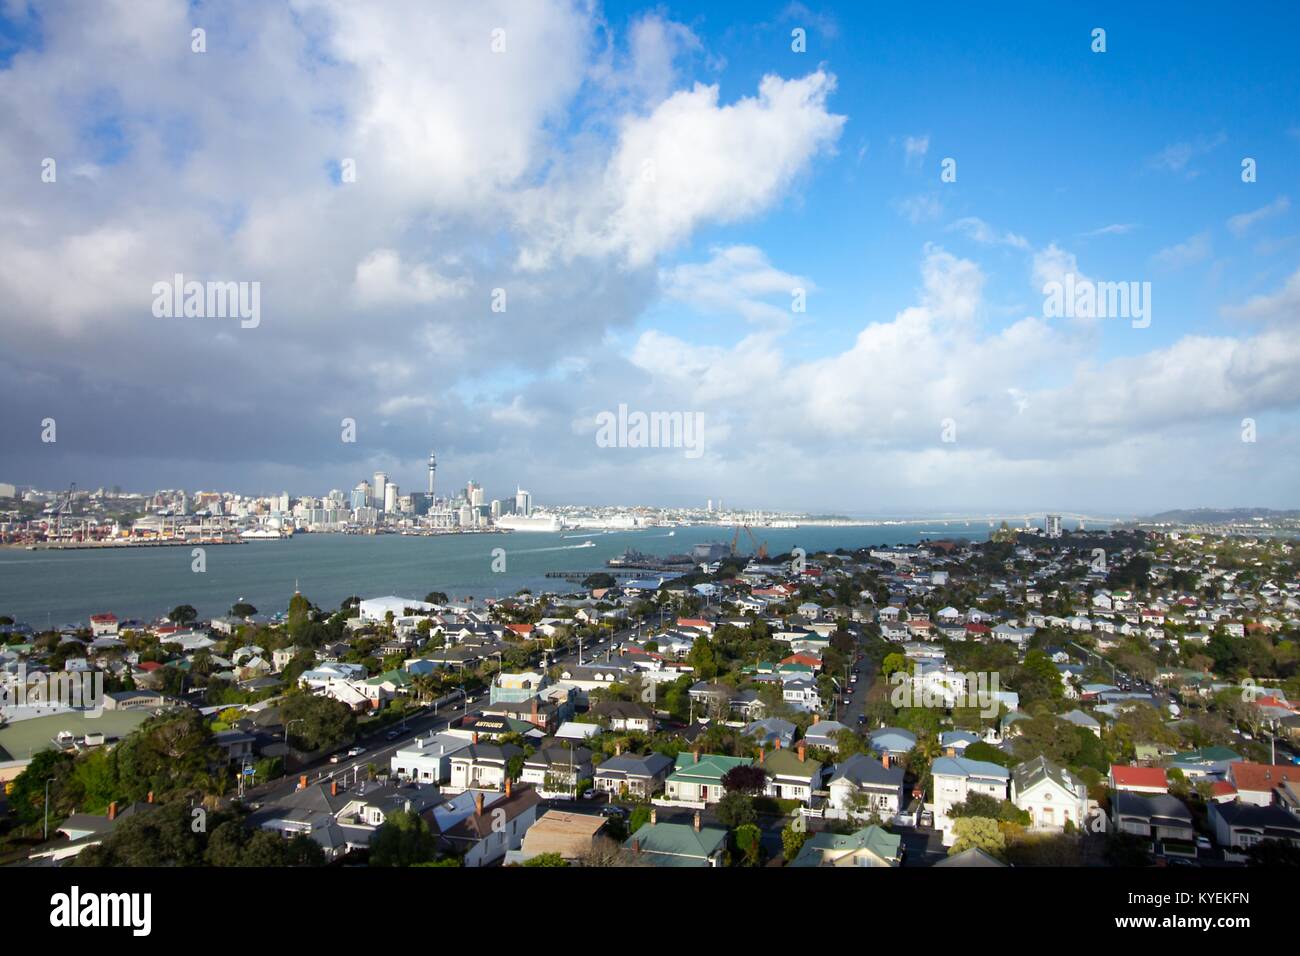 The urban skyline and surrounding neighborhoods of Auckland, New Zealand, as well as Auckland Harbor, are visible from Mount Victoria under a dramatic sky, October 11, 2017. () Stock Photo